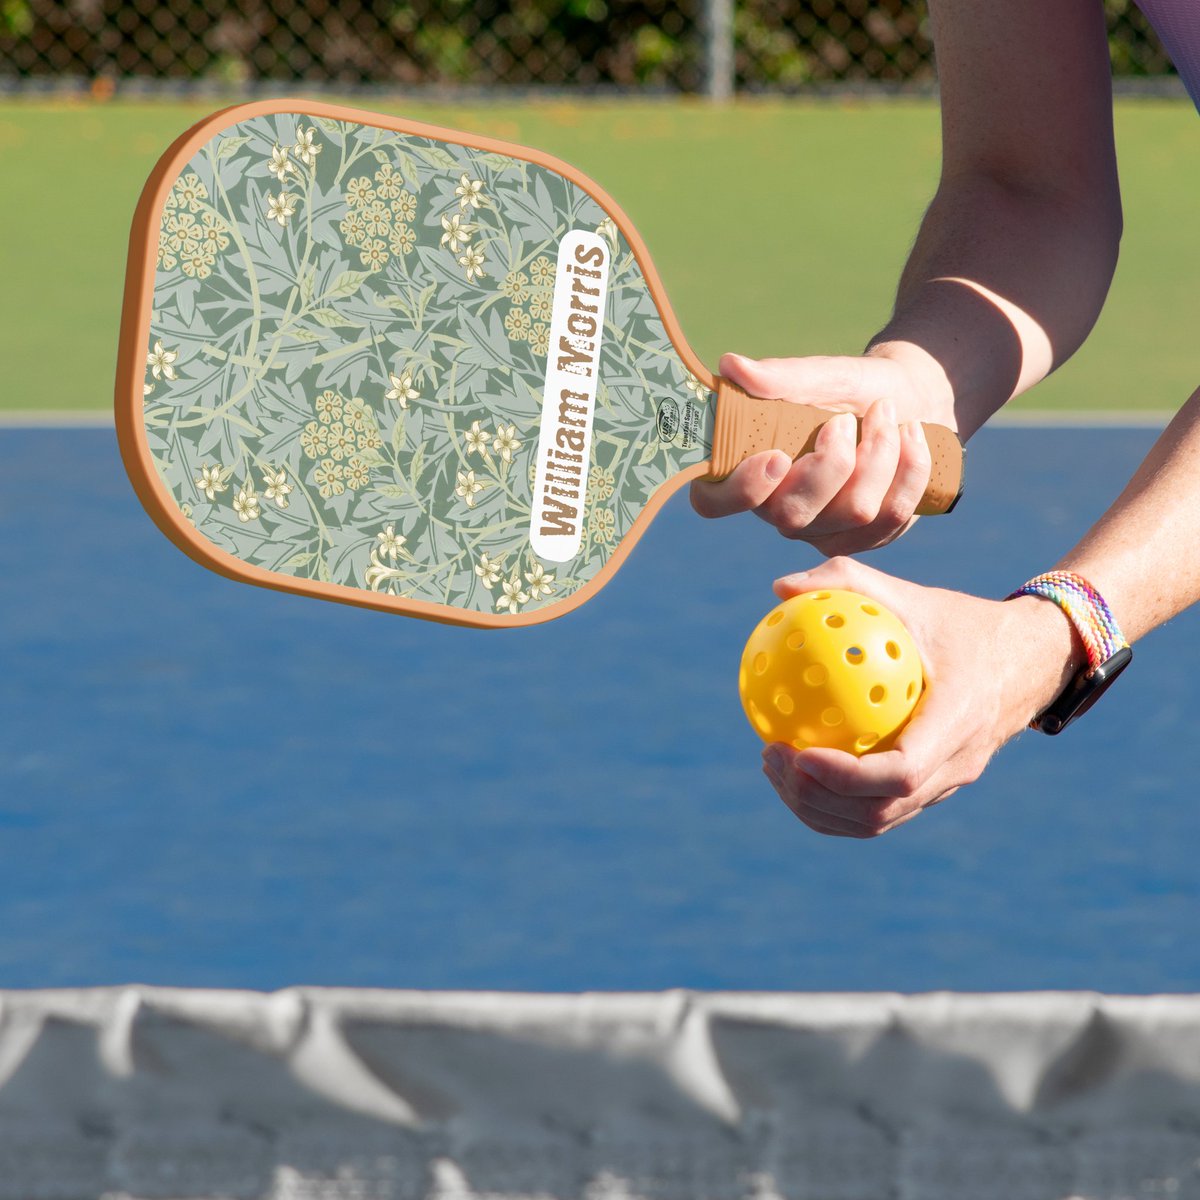 Artistry of William Morris's Jasmine Pattern Pickleball Paddle
zazzle.com/artistry_of_wi…

#WilliamMorrisArt #JasminePattern #PickleballPaddle #SummerGame #OutdoorFun #ArtisticDesign #HandcraftedBeauty #GameInStyle #MorrisInspired #PaddlePerfection #ArtistryUnleashed #CreativePlay